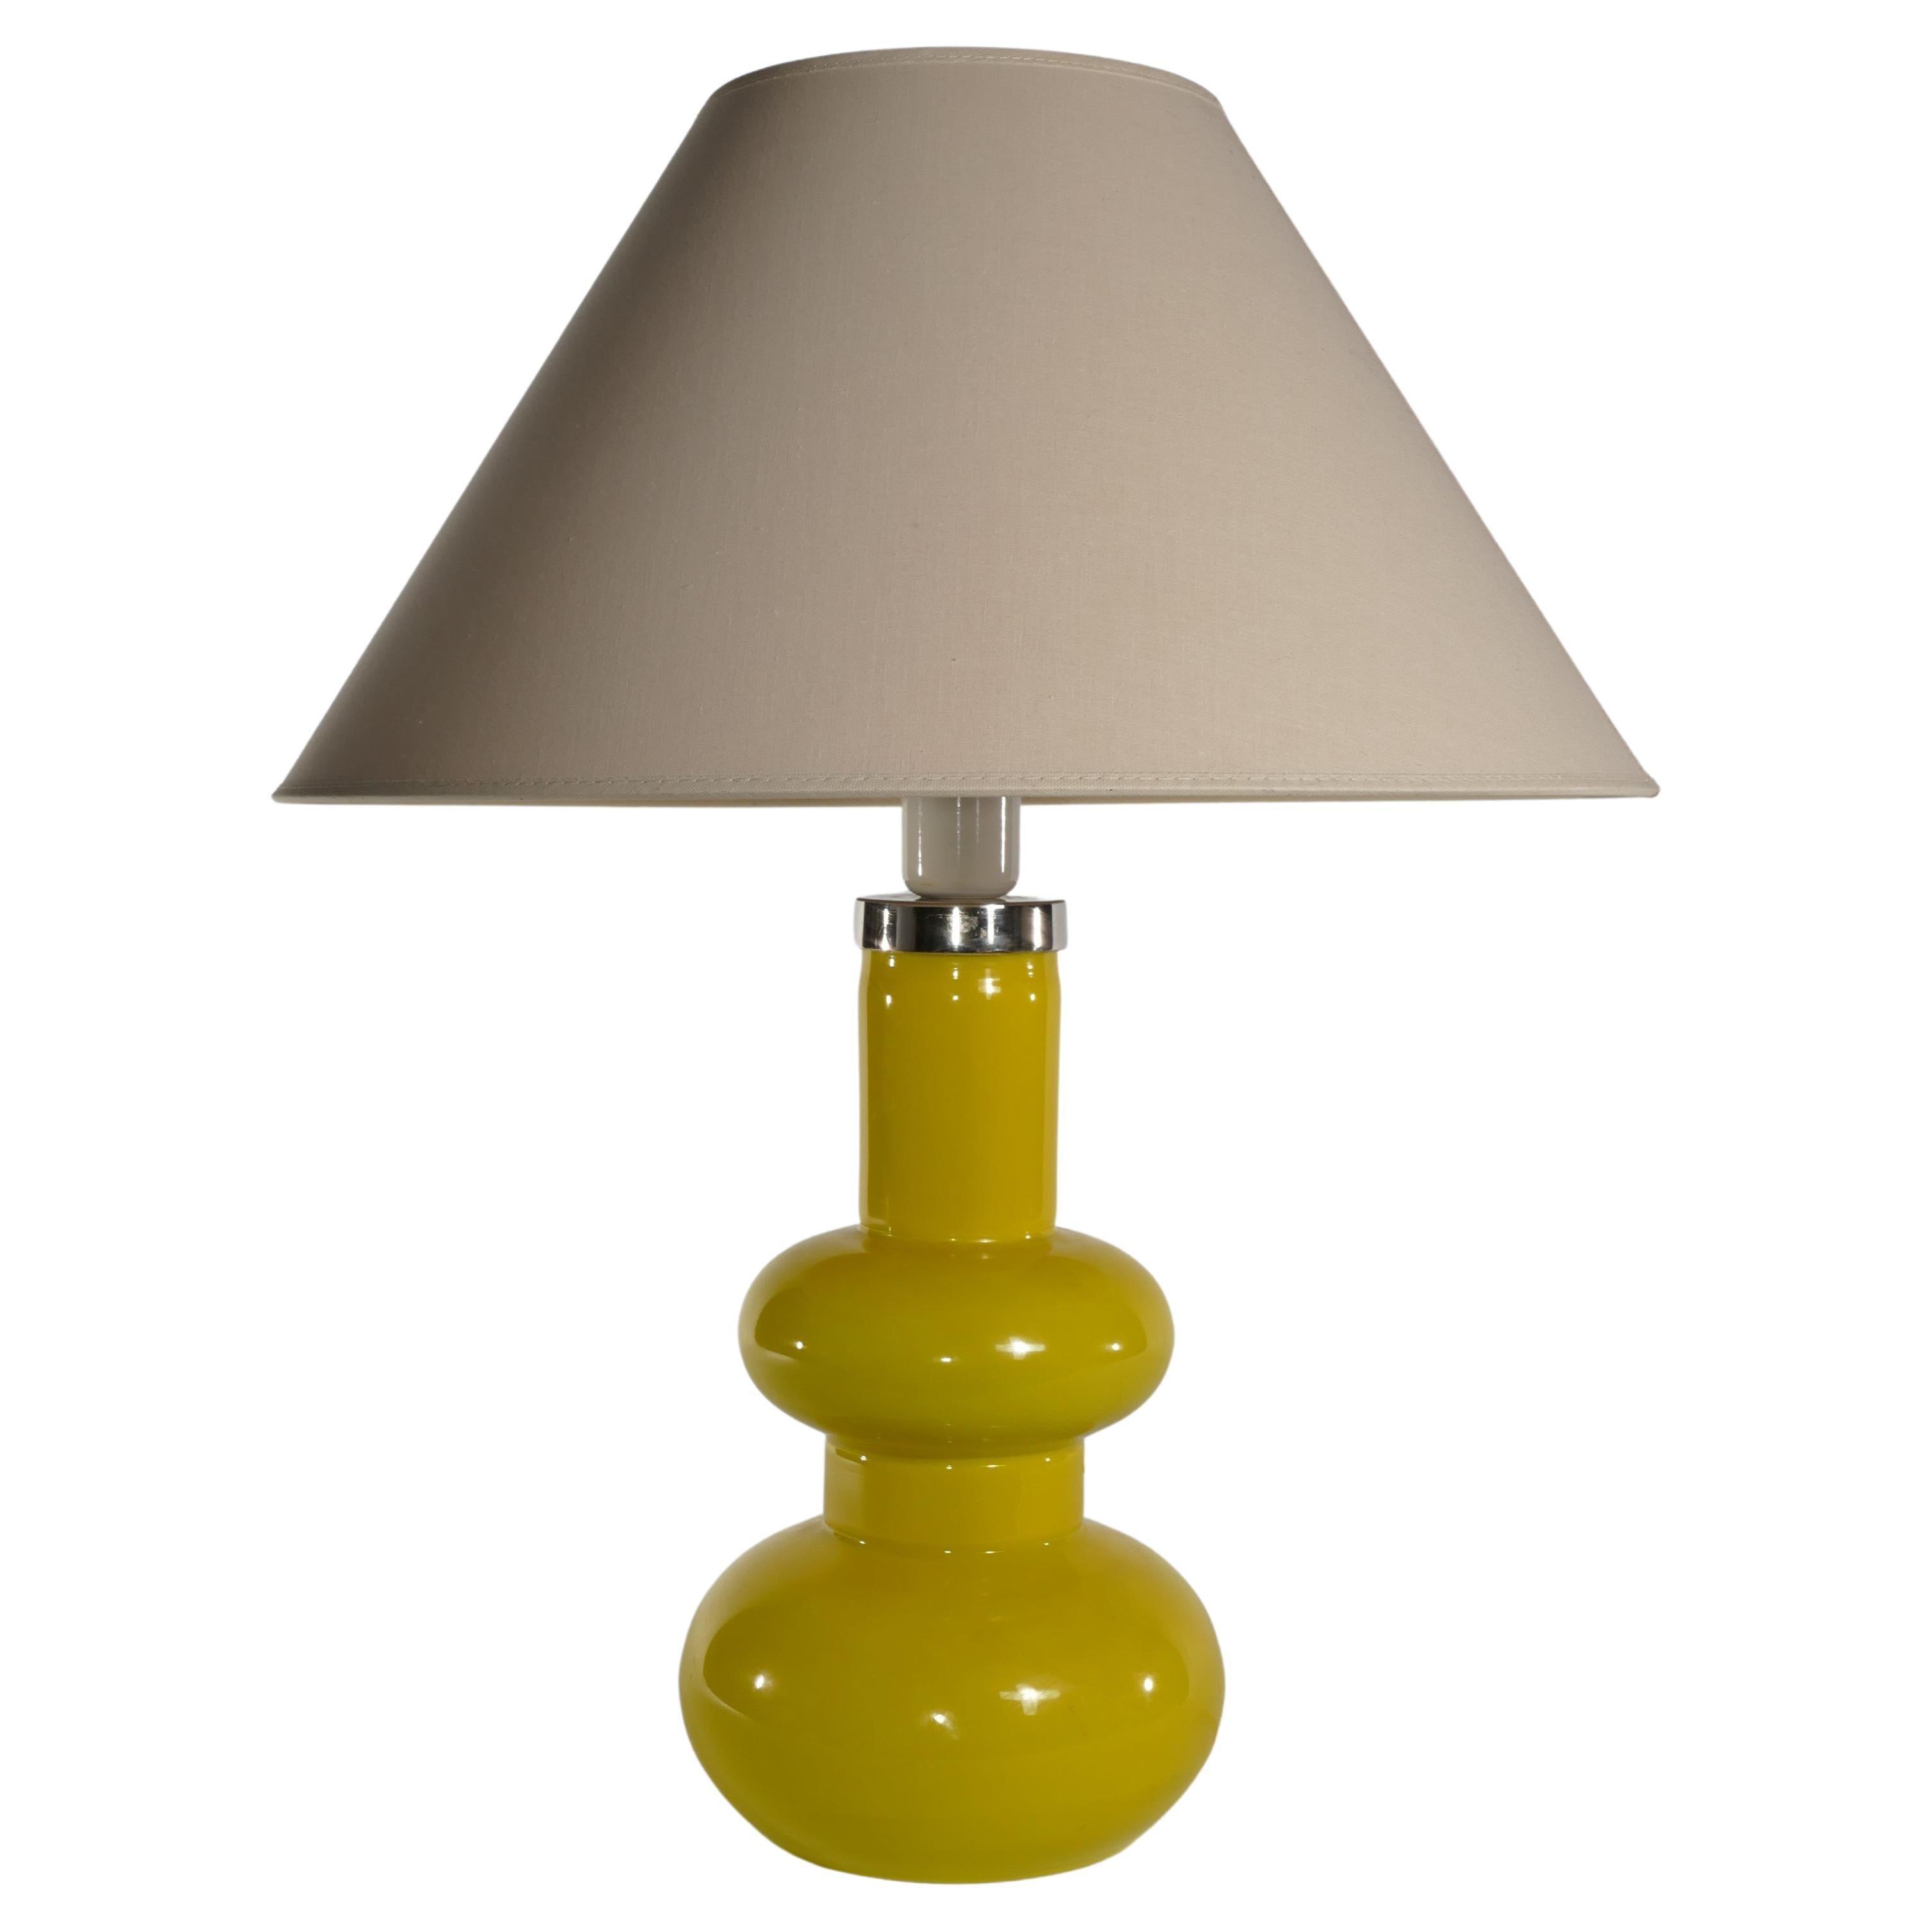 Mid-Century Modern Curvaceous Bright Yellow Glass Table Lamp by Orrefors, 1960s For Sale